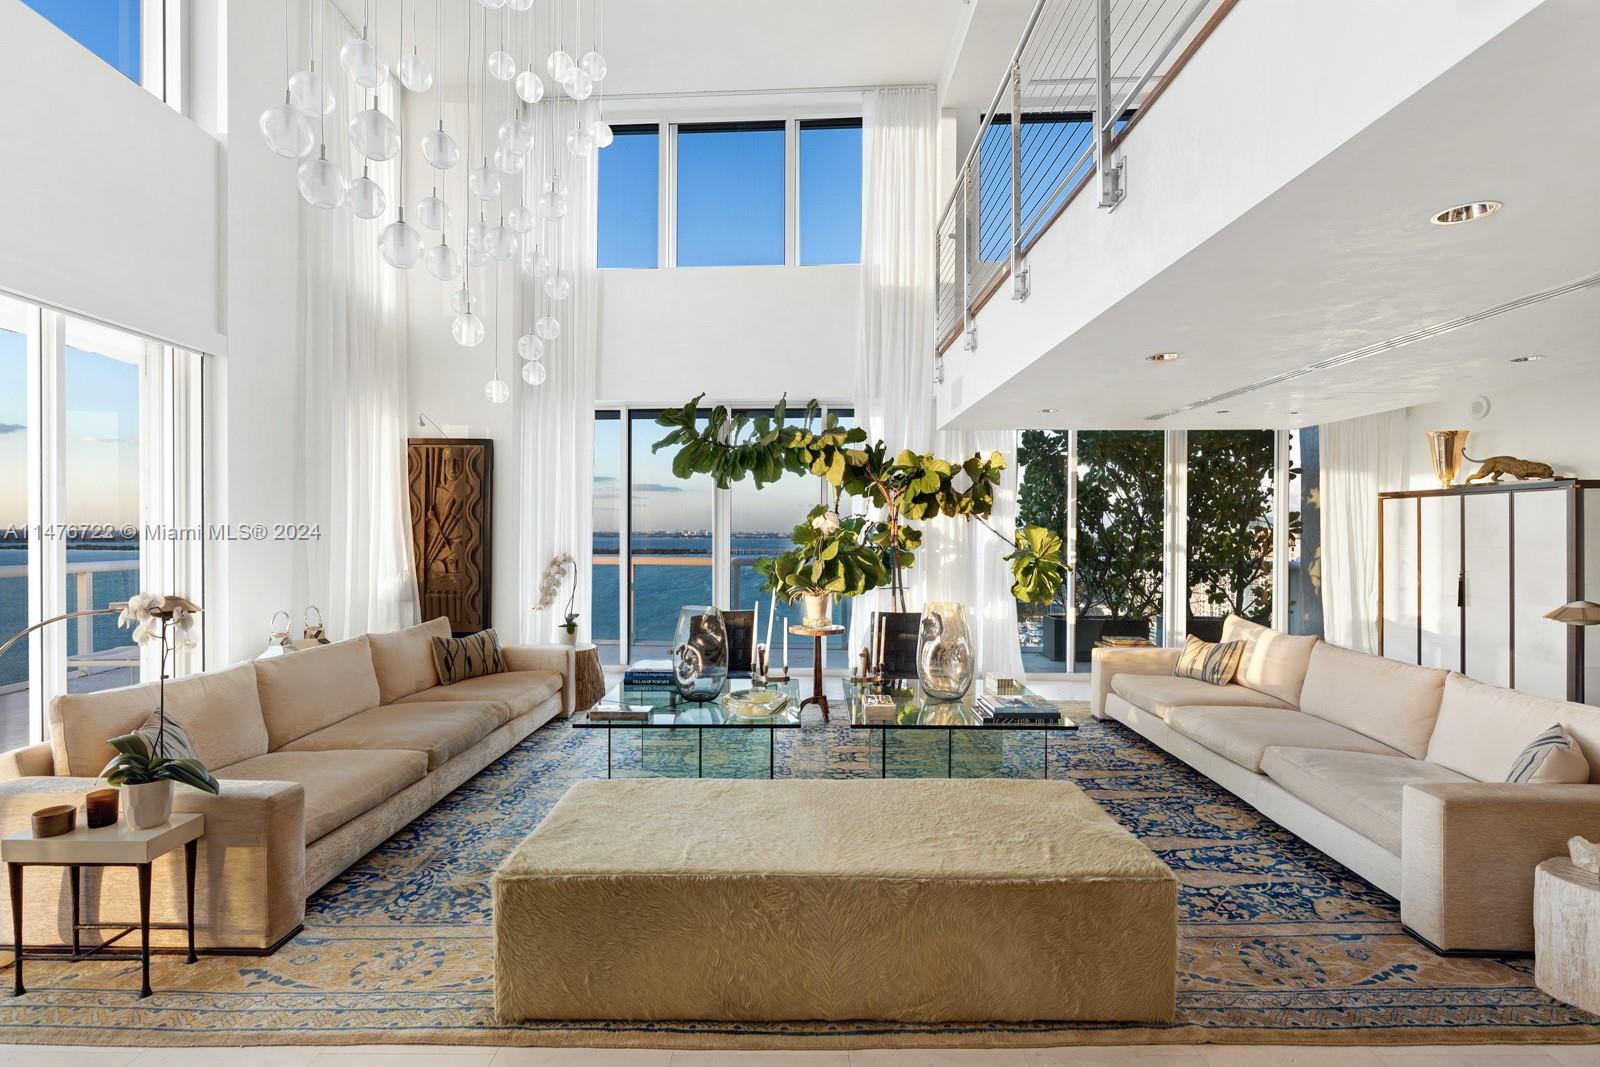 Enjoy 270-degree panoramic views of Miami’s Skyline, Biscayne Bay, Venetian Islands, and the ocean from the top floor of the Grand Venetian. This 4,750 sq. ft. two-story PH features two wrap-around balconies and 22 ft. floor-to-ceiling windows. The 1st level contains a primary suite w/ a steam sauna, an open kitchen w/ 2 dishwashers, 2 refrigerators & 3 freezers, and an open living and dining area perfect for entertaining. The 2nd level offers 2 guest suites, a media room w/ a bar, and an office/loft. This home in the sky has Miele and SubZero appliances & slate, wood, marble, and limestone flooring throughout. Located on Belle Isle, you are steps away from Sunset Harbor, Lincoln Rd shopping, & more. Building amenities include a pool, hot tub, BBQs, gym, tennis court, valet, security, etc.